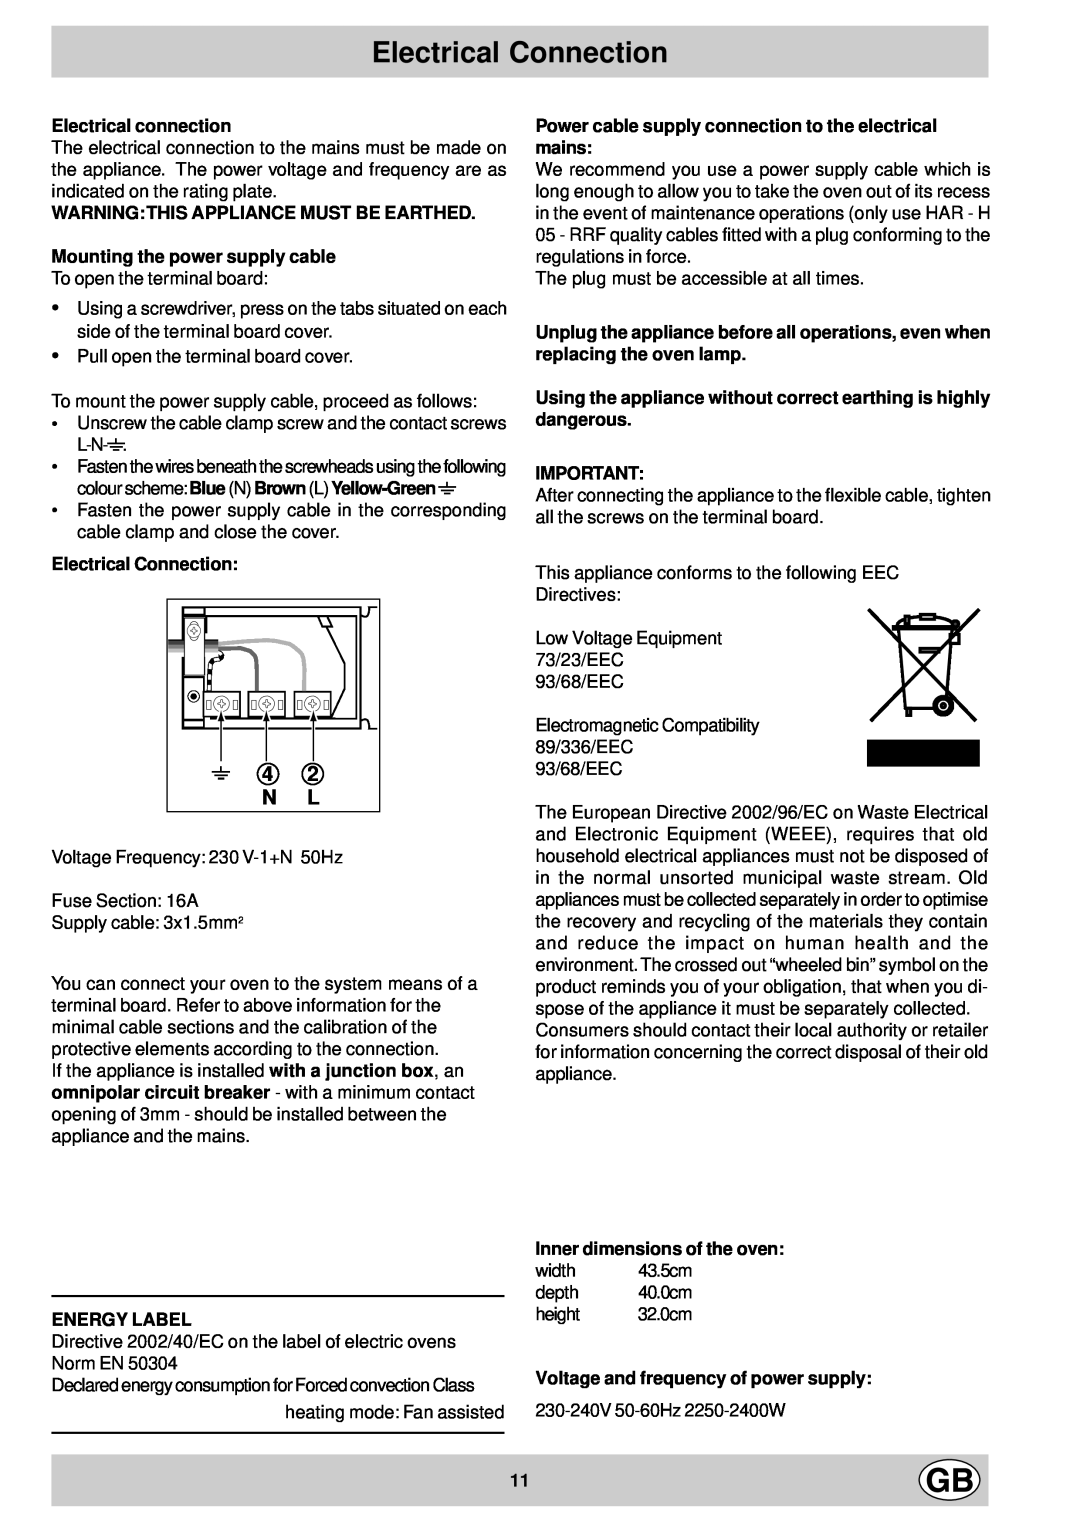 Hotpoint SC36E manual Electrical Connection, 4 2 N L, Electrical connection, Energy Label, Inner dimensions of the oven 